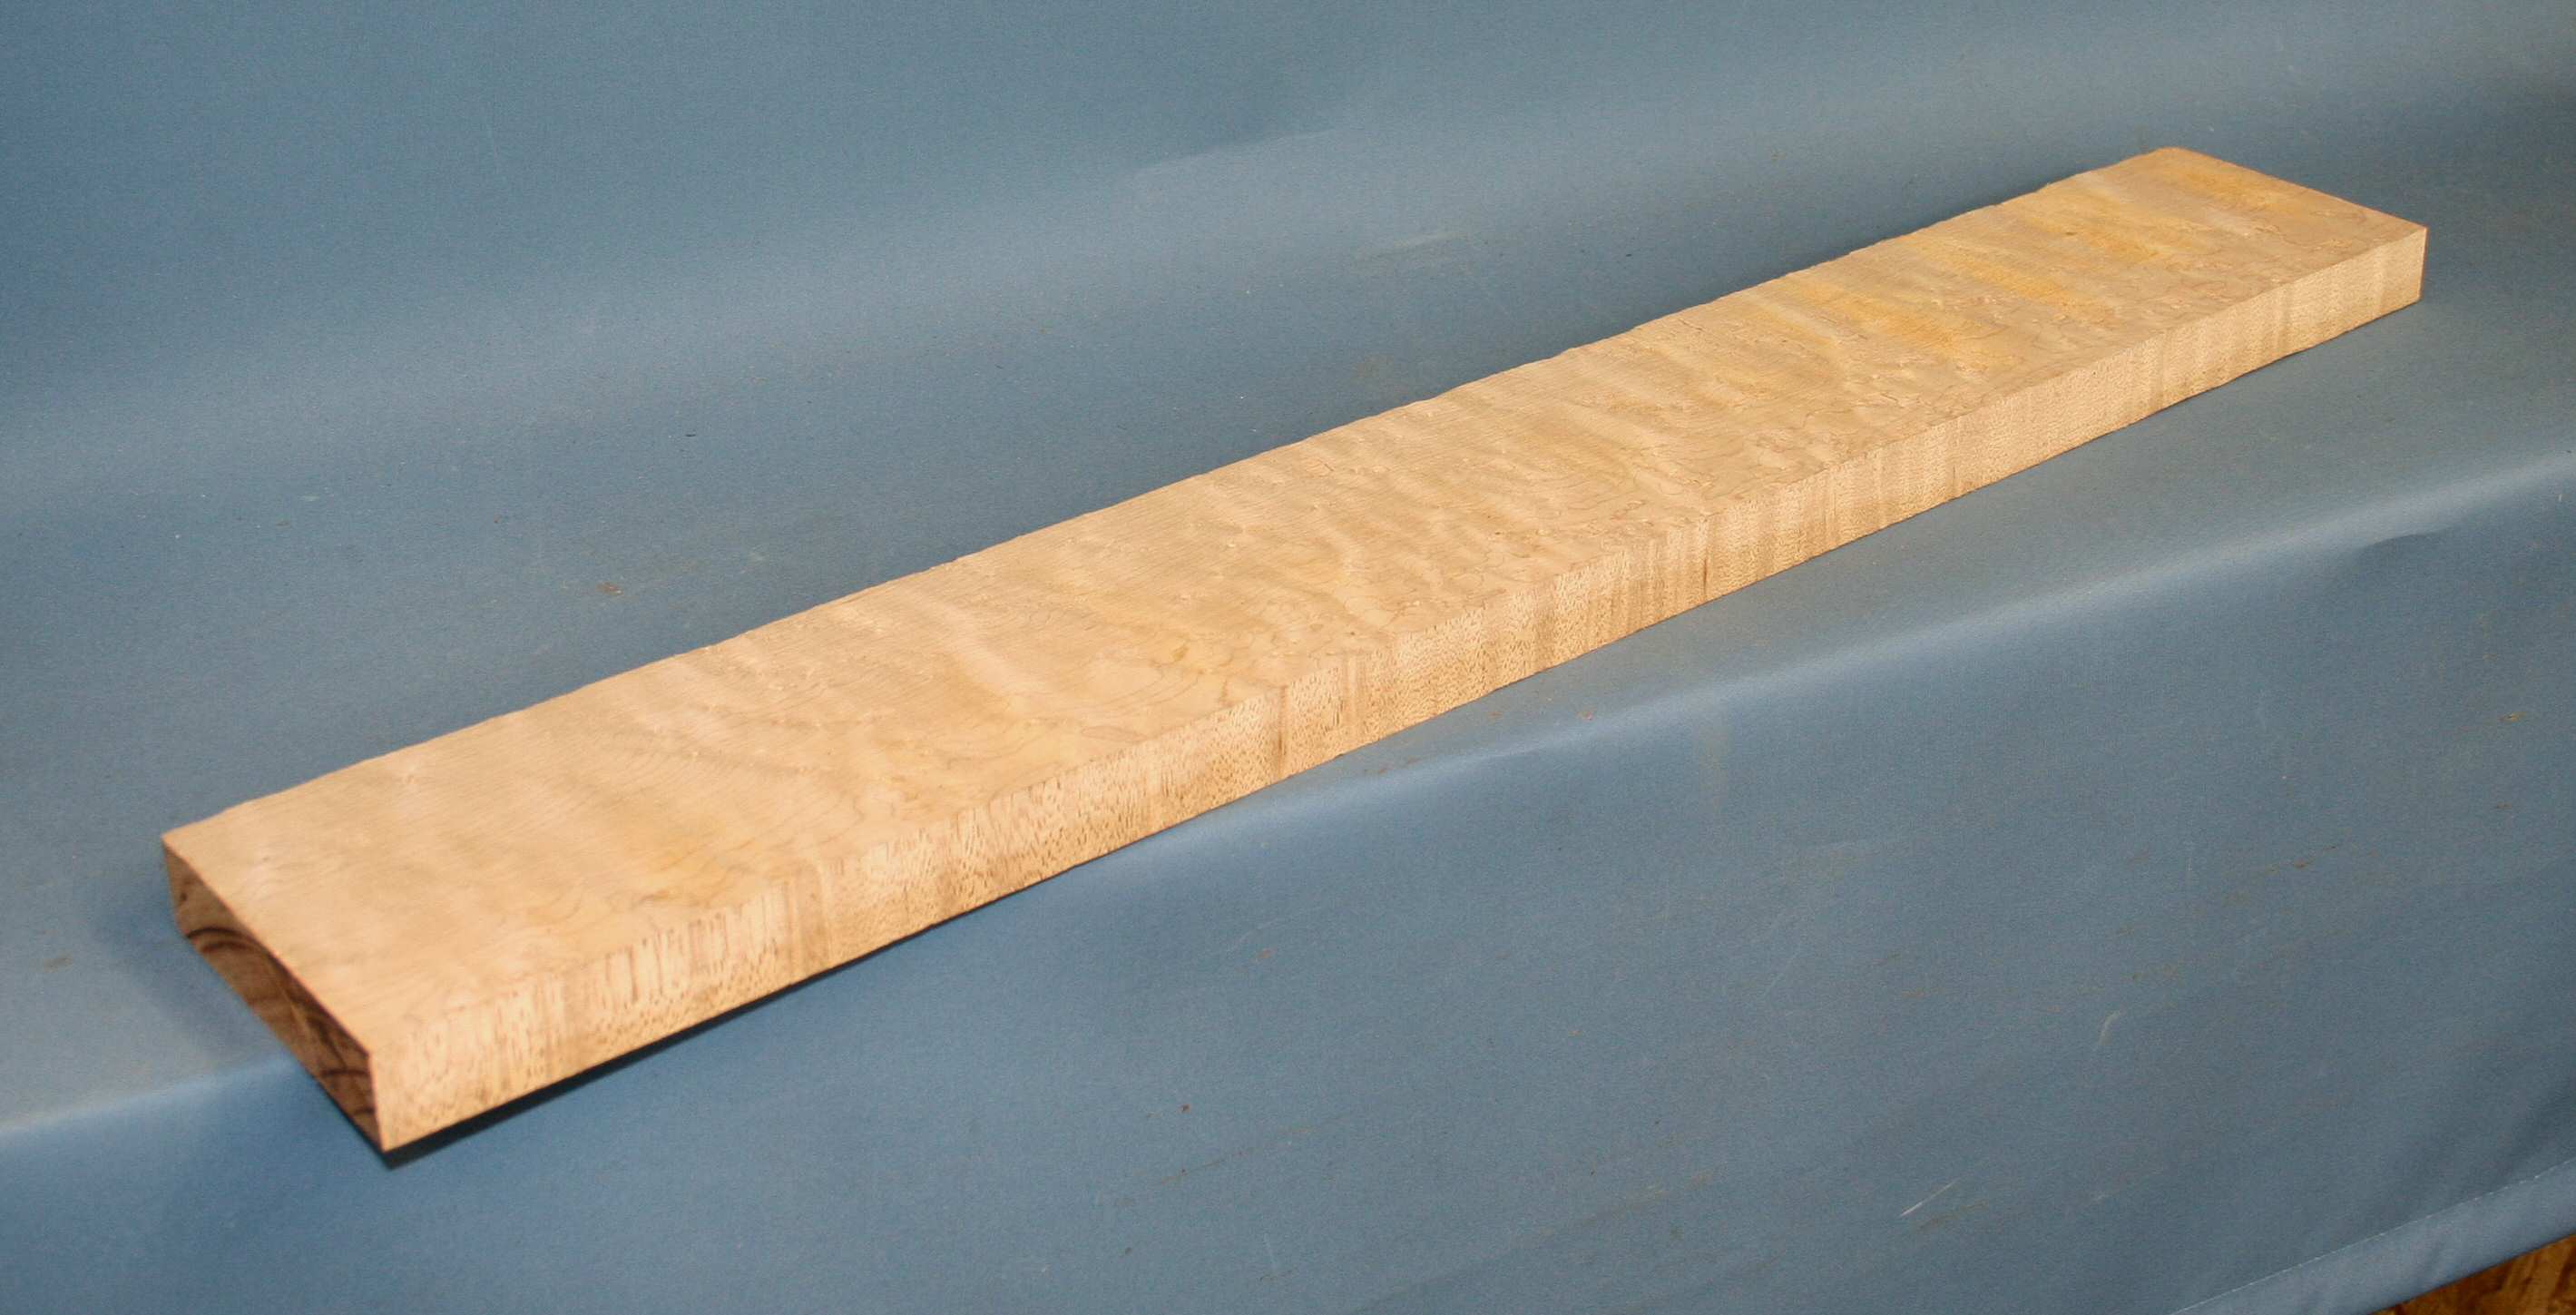 Electric guitar neck blanks